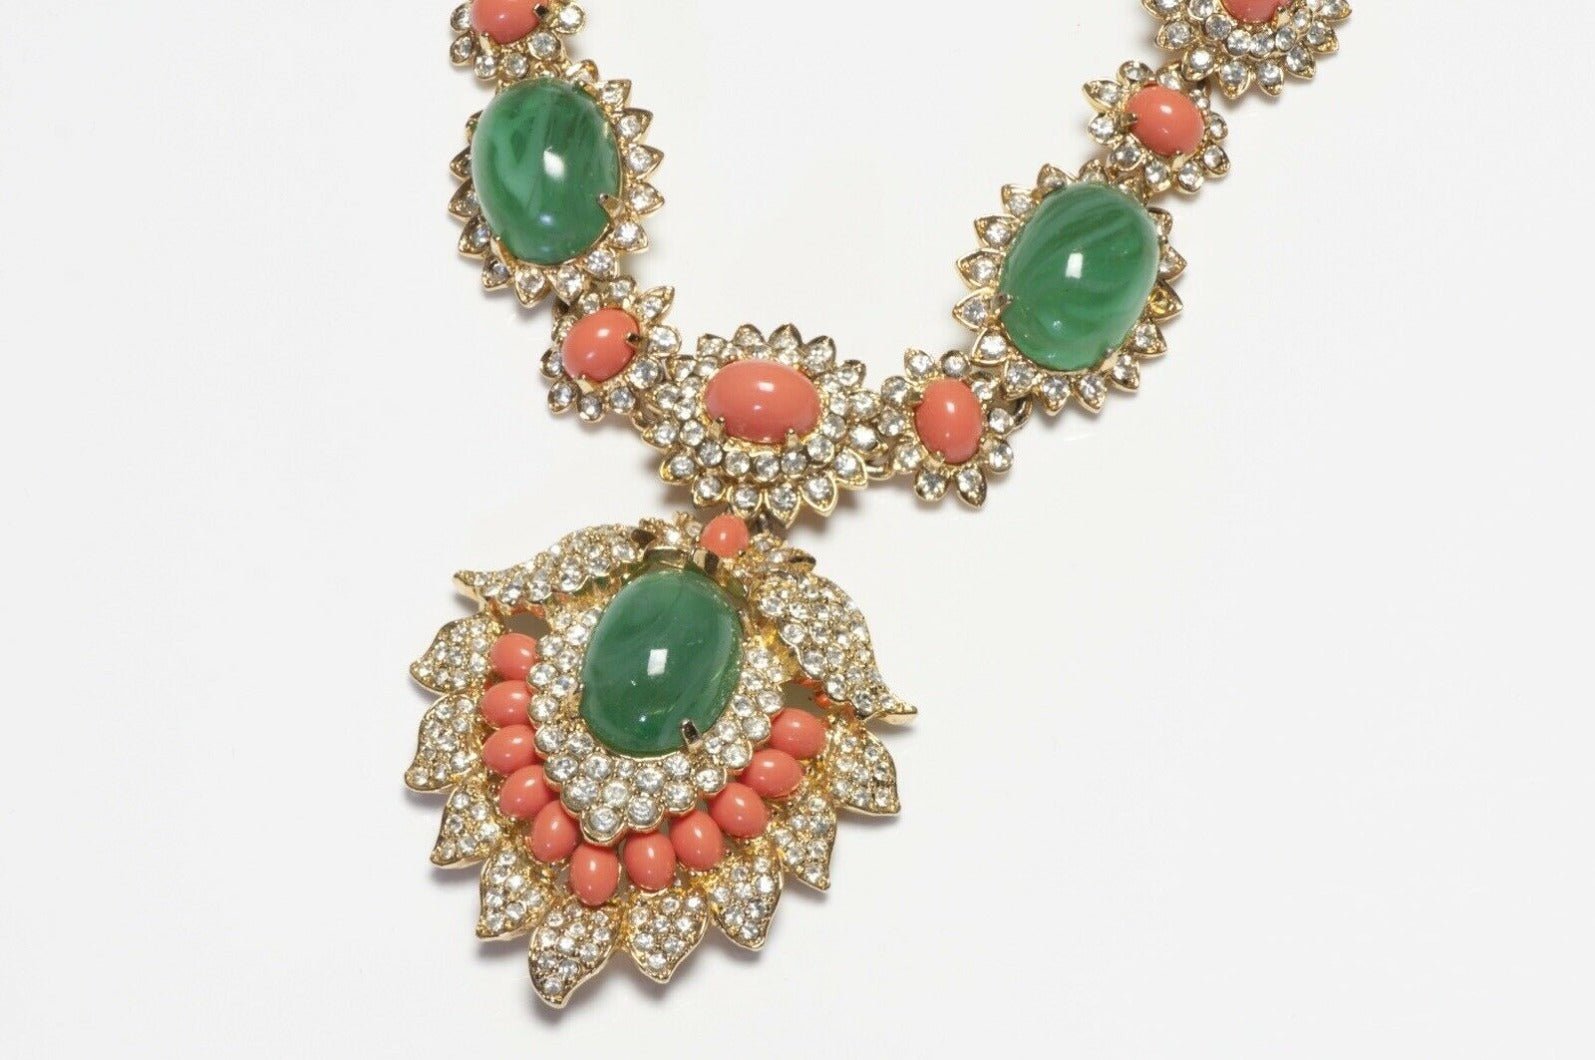 Kenneth Jay Lane Green Cabochon Glass Mughal Style Necklace